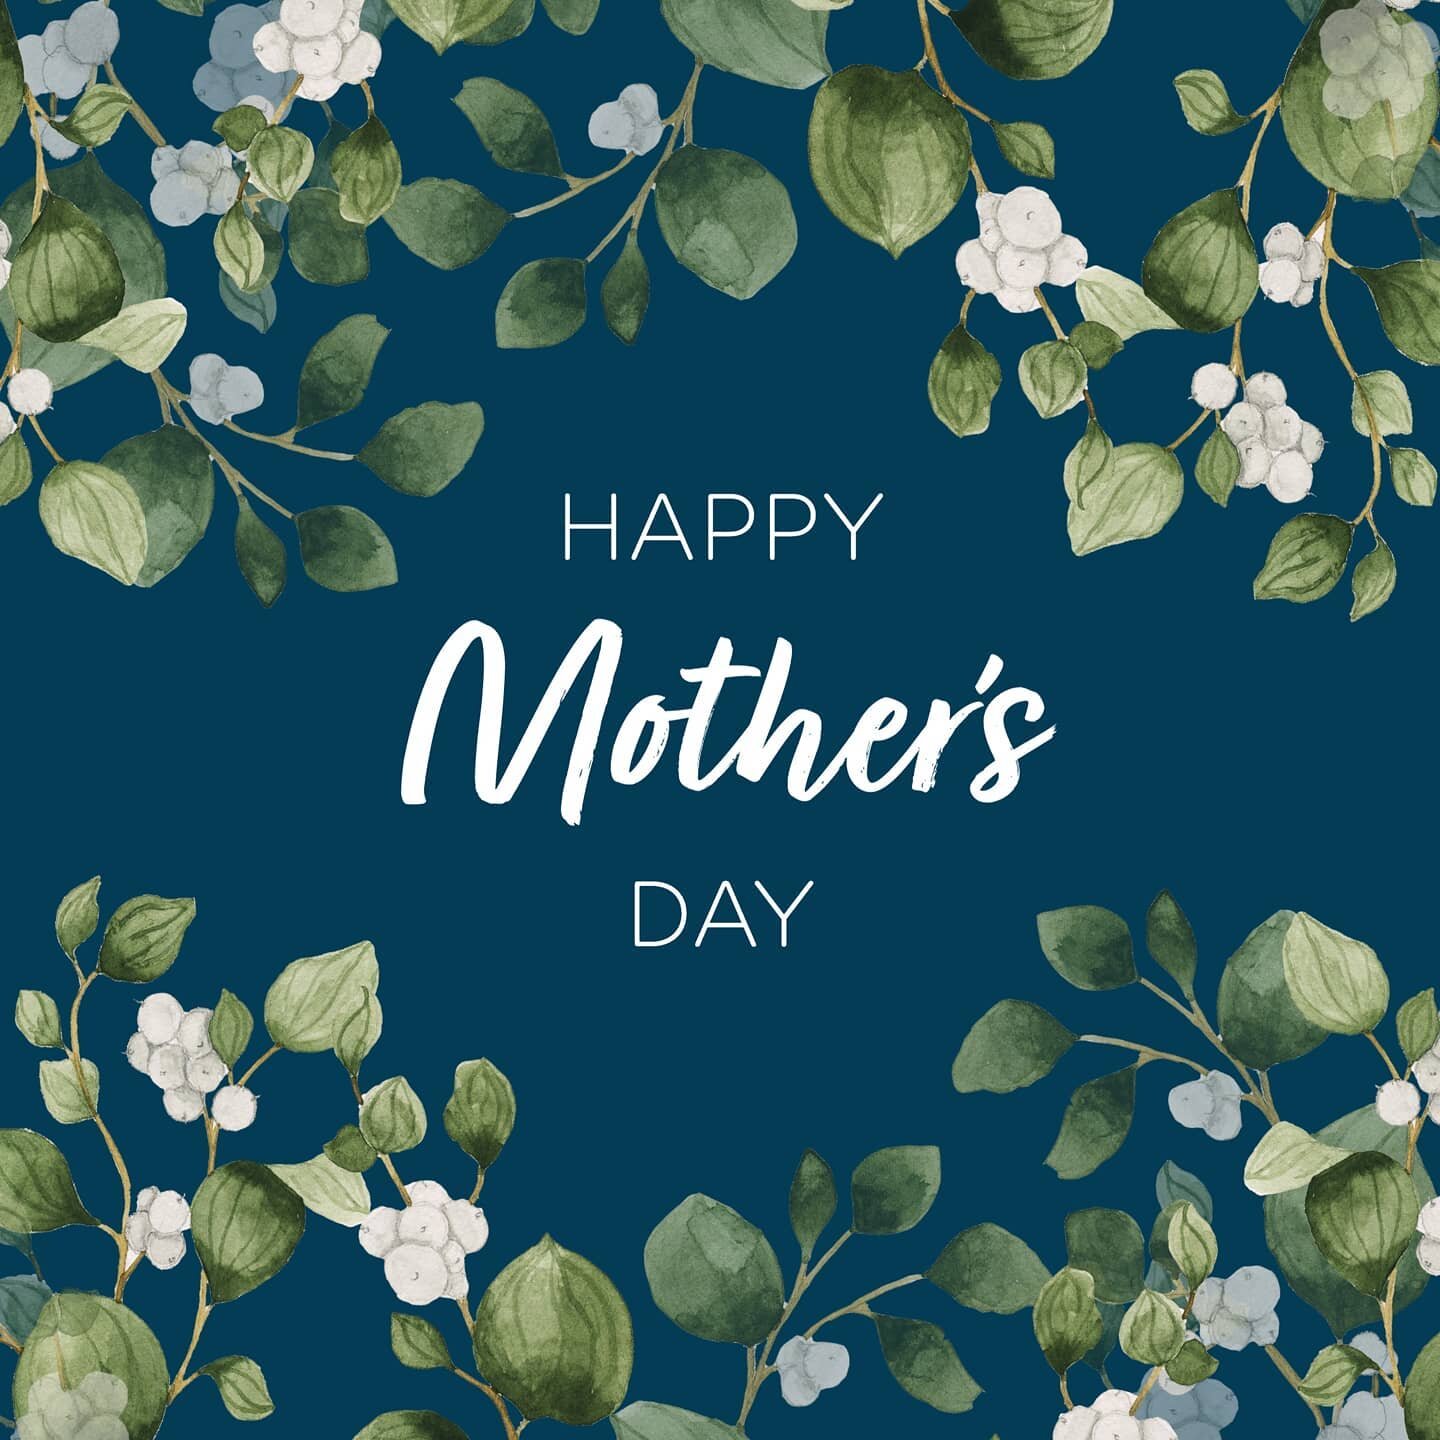 Happy Mother's Day to all the fabulous moms in our lives! We appreciate every single one of you for being there and supporting us through all these years! 🥰

#screenprint #screenprinting #silkscreen #local #brandedapparel #torrance #custommerchandis